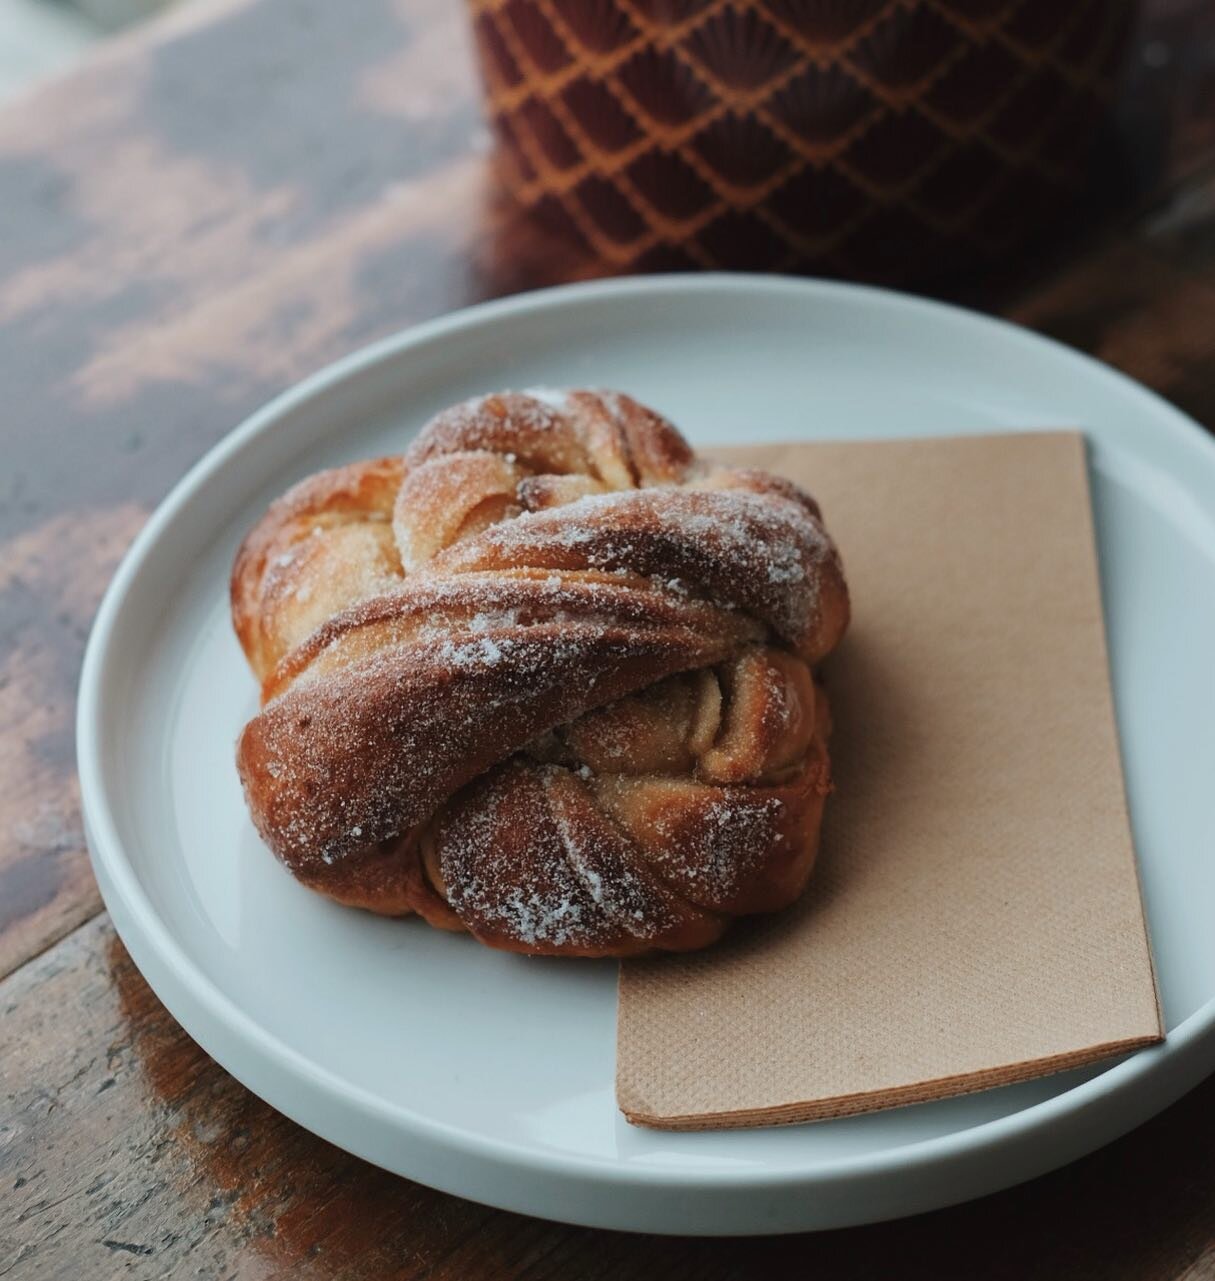 The OG. Freshly baked @byggabo buns serving at our place from 7am Mon-Sat; 8am Sunday. 

Preorders happening through our website (link in profile).
#kanelbullar #swedishbuns #vegan #veganfood #whatveganseat #plantbased #coffeeshop #coffeetime #coffee